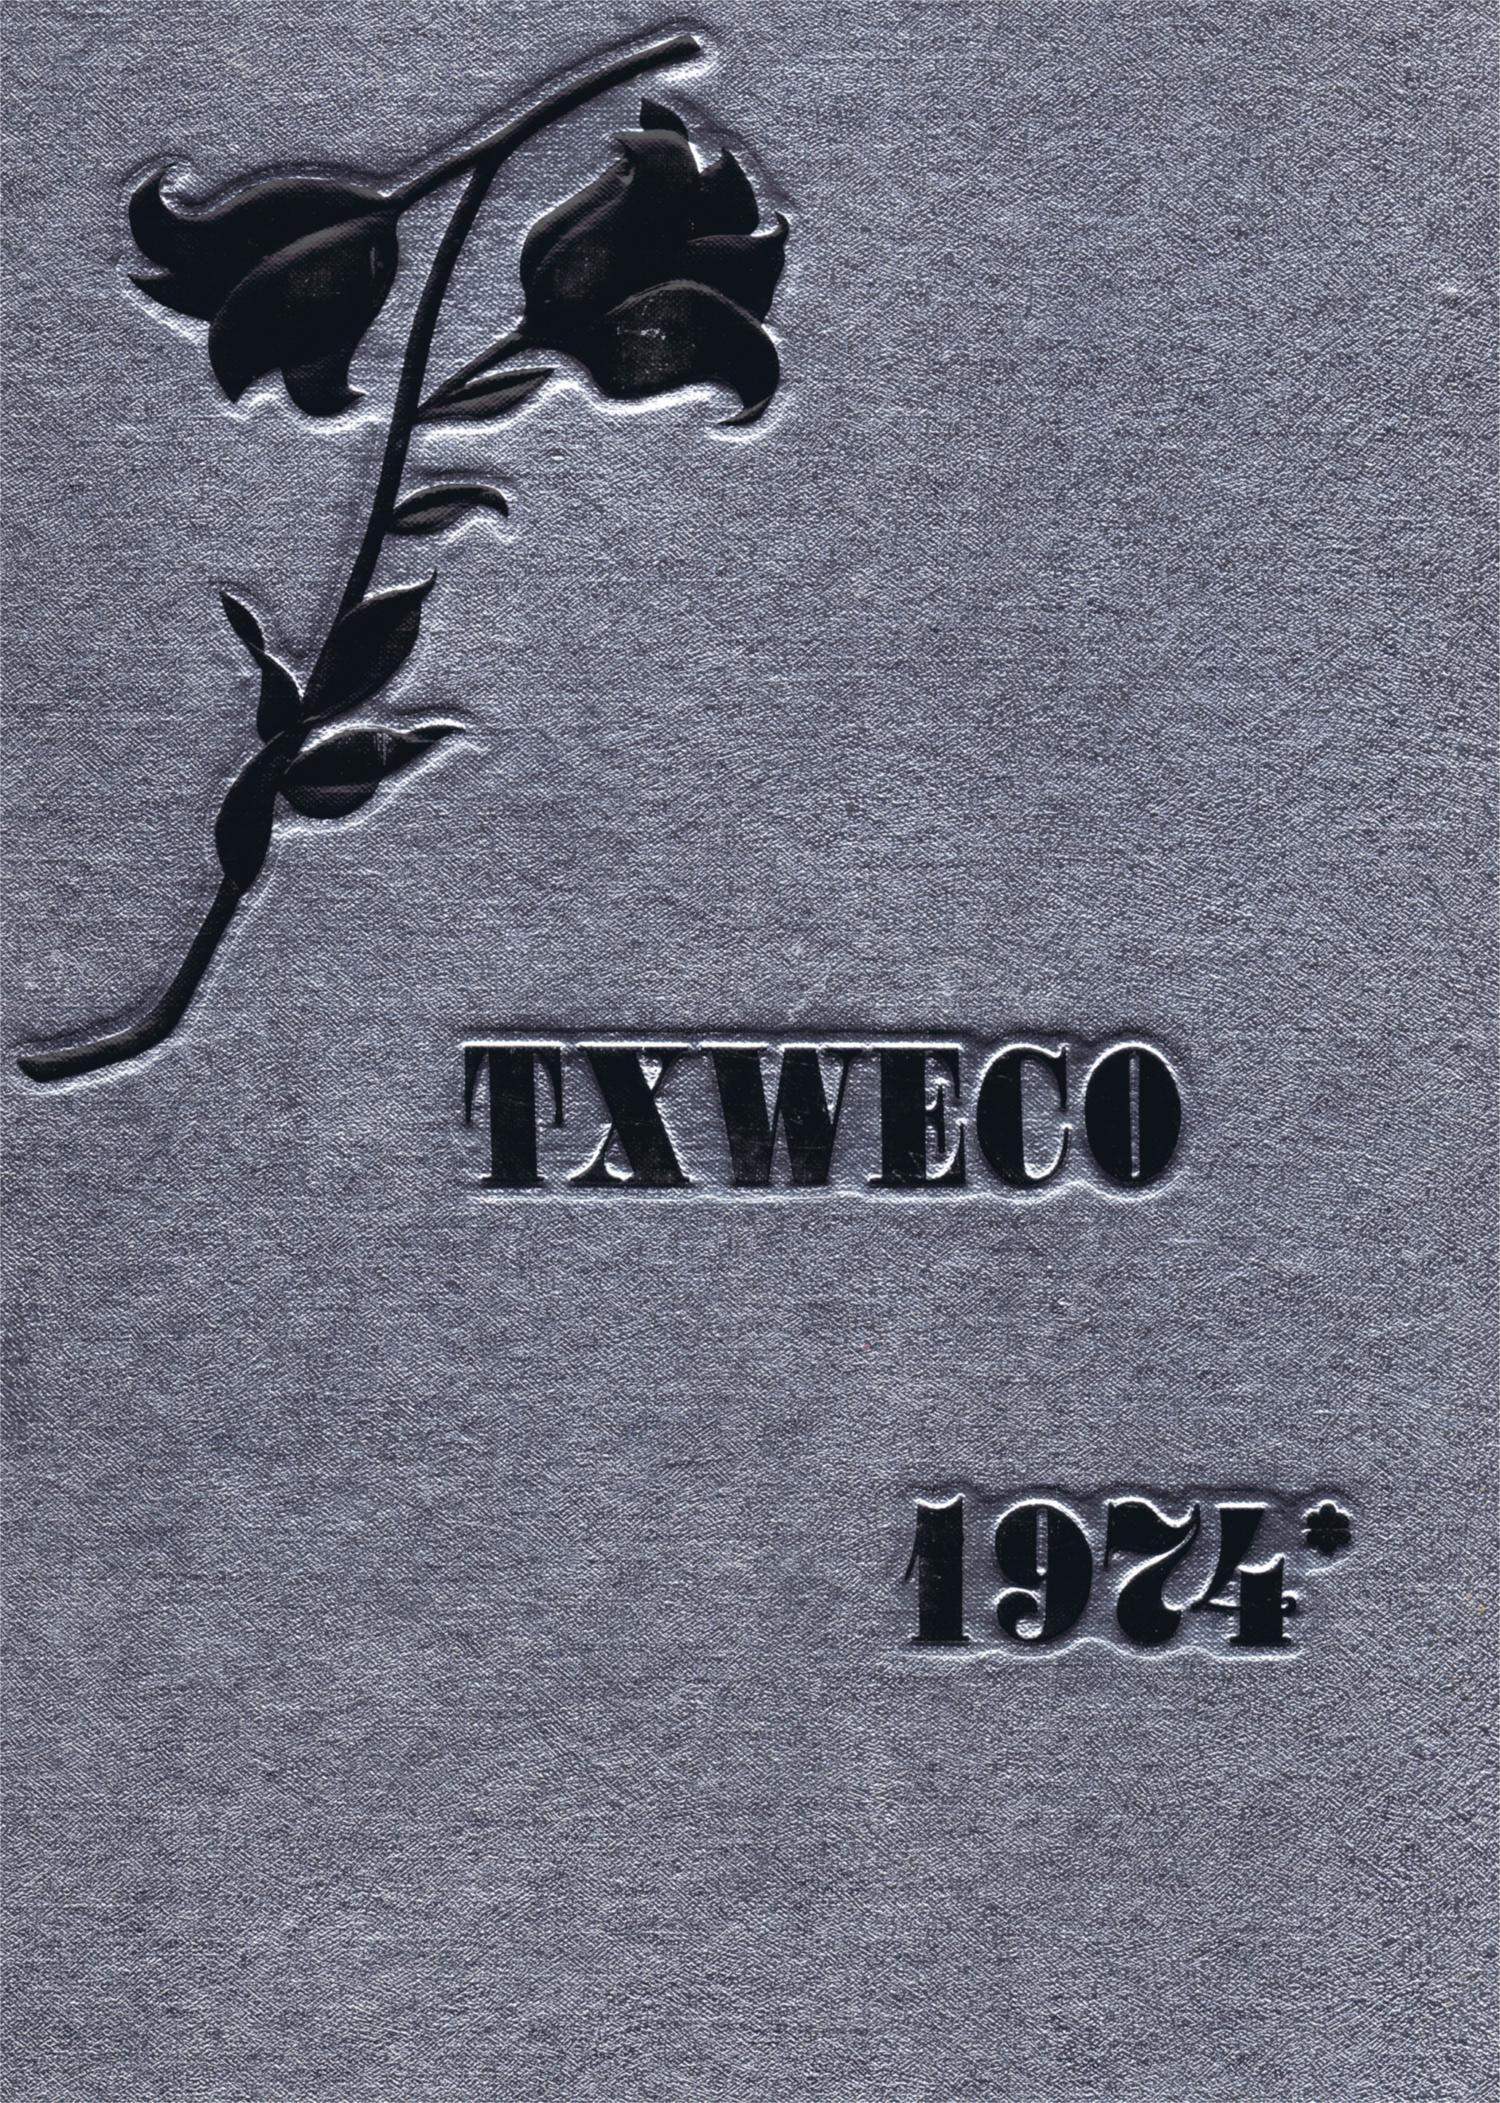 TXWECO, Yearbook of Texas Wesleyan College, 1974
                                                
                                                    Front Cover
                                                